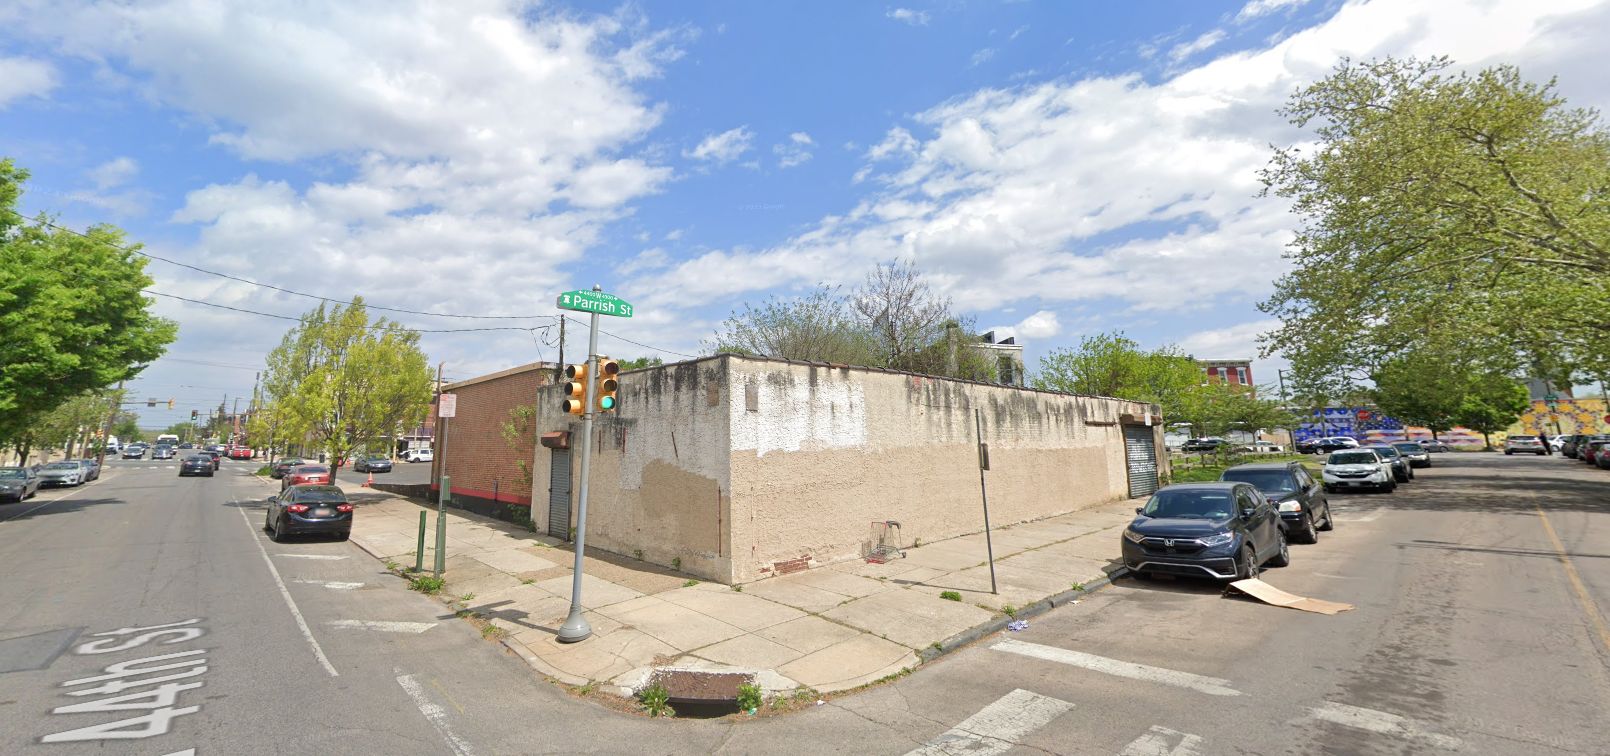 4328 Lancaster Avenue prior to redevelopment. Looking northeast. April 2023. Credit: Google Maps